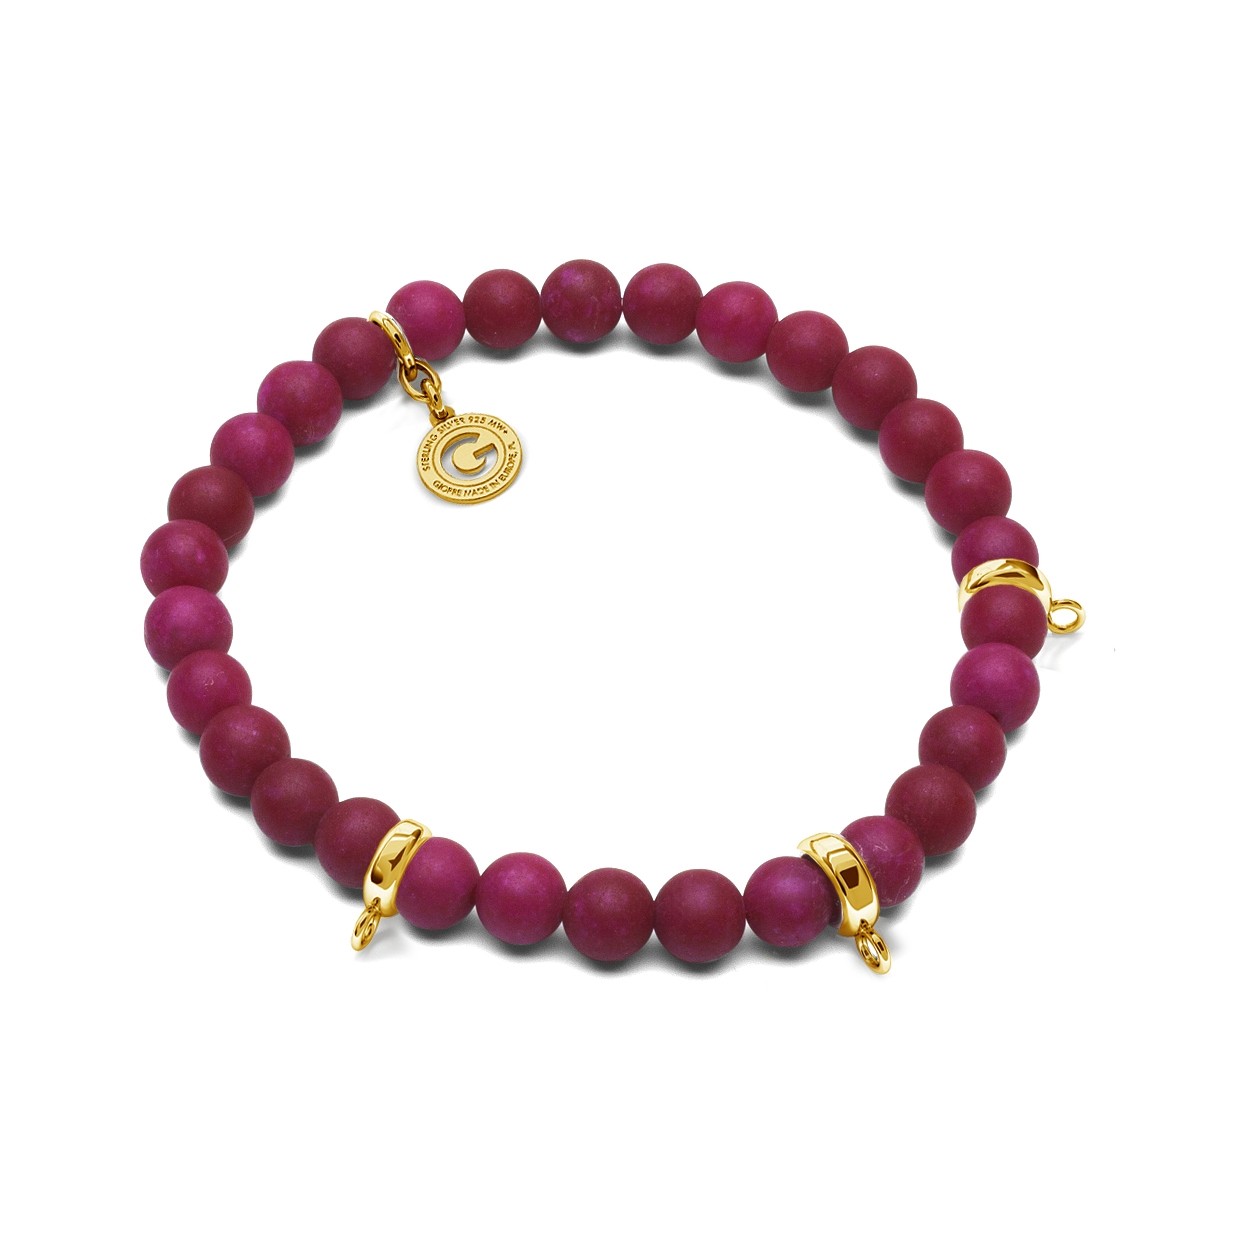 AGAT BURGUND, FLEXIBLE BRACELET FOR 3 CHARMS, WITH NATURAL STONES